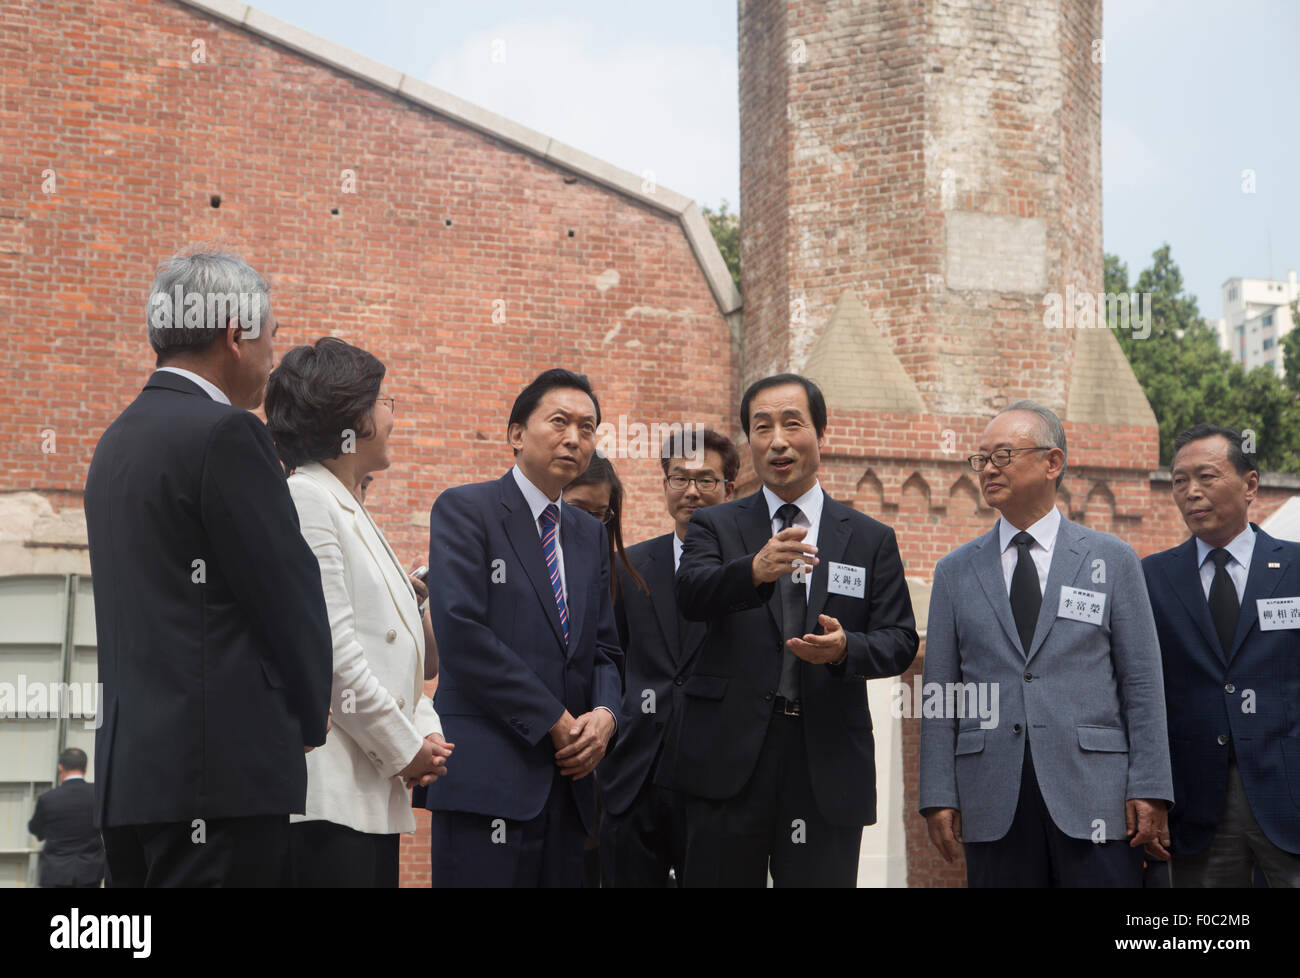 Yukio Hatoyama, Aug 12, 2015 : Japan's former Prime Minister Yukio Hatoyama (3rd L) visits the Seodaemun Prison History Hall in Seoul, South Korea. The Seodaemun Prison History Hall was a prison where Japan had imprisoned Korean fighters for independence during Japan's colonial rule of Korea from 1910-1945. Credit:  Lee Jae-Won/AFLO/Alamy Live News Stock Photo